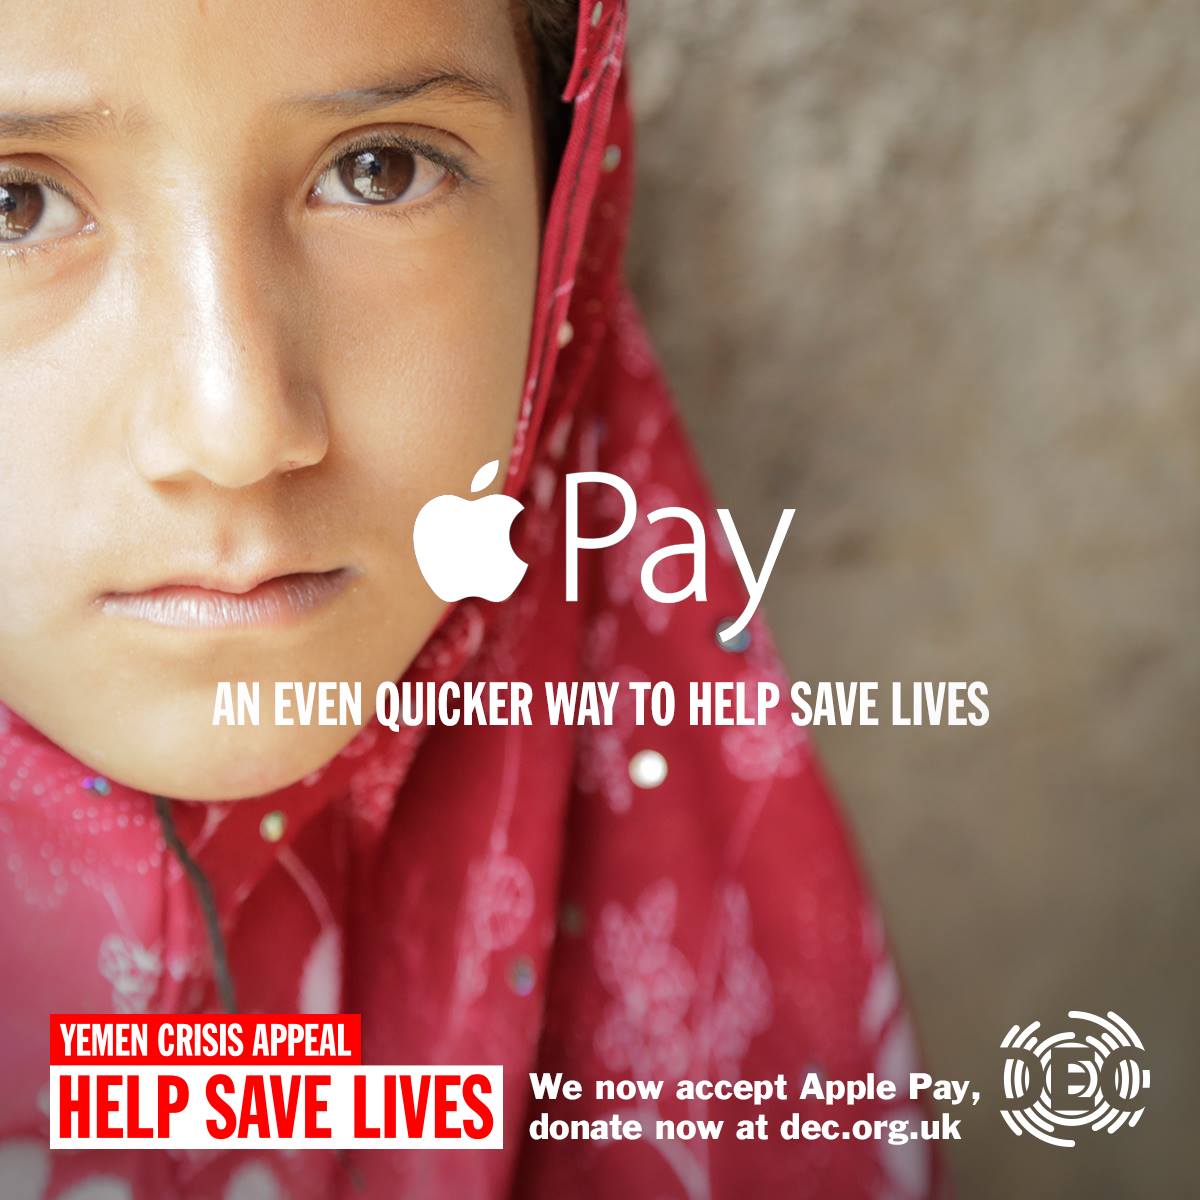 DEC accepts donations by Apple Pay